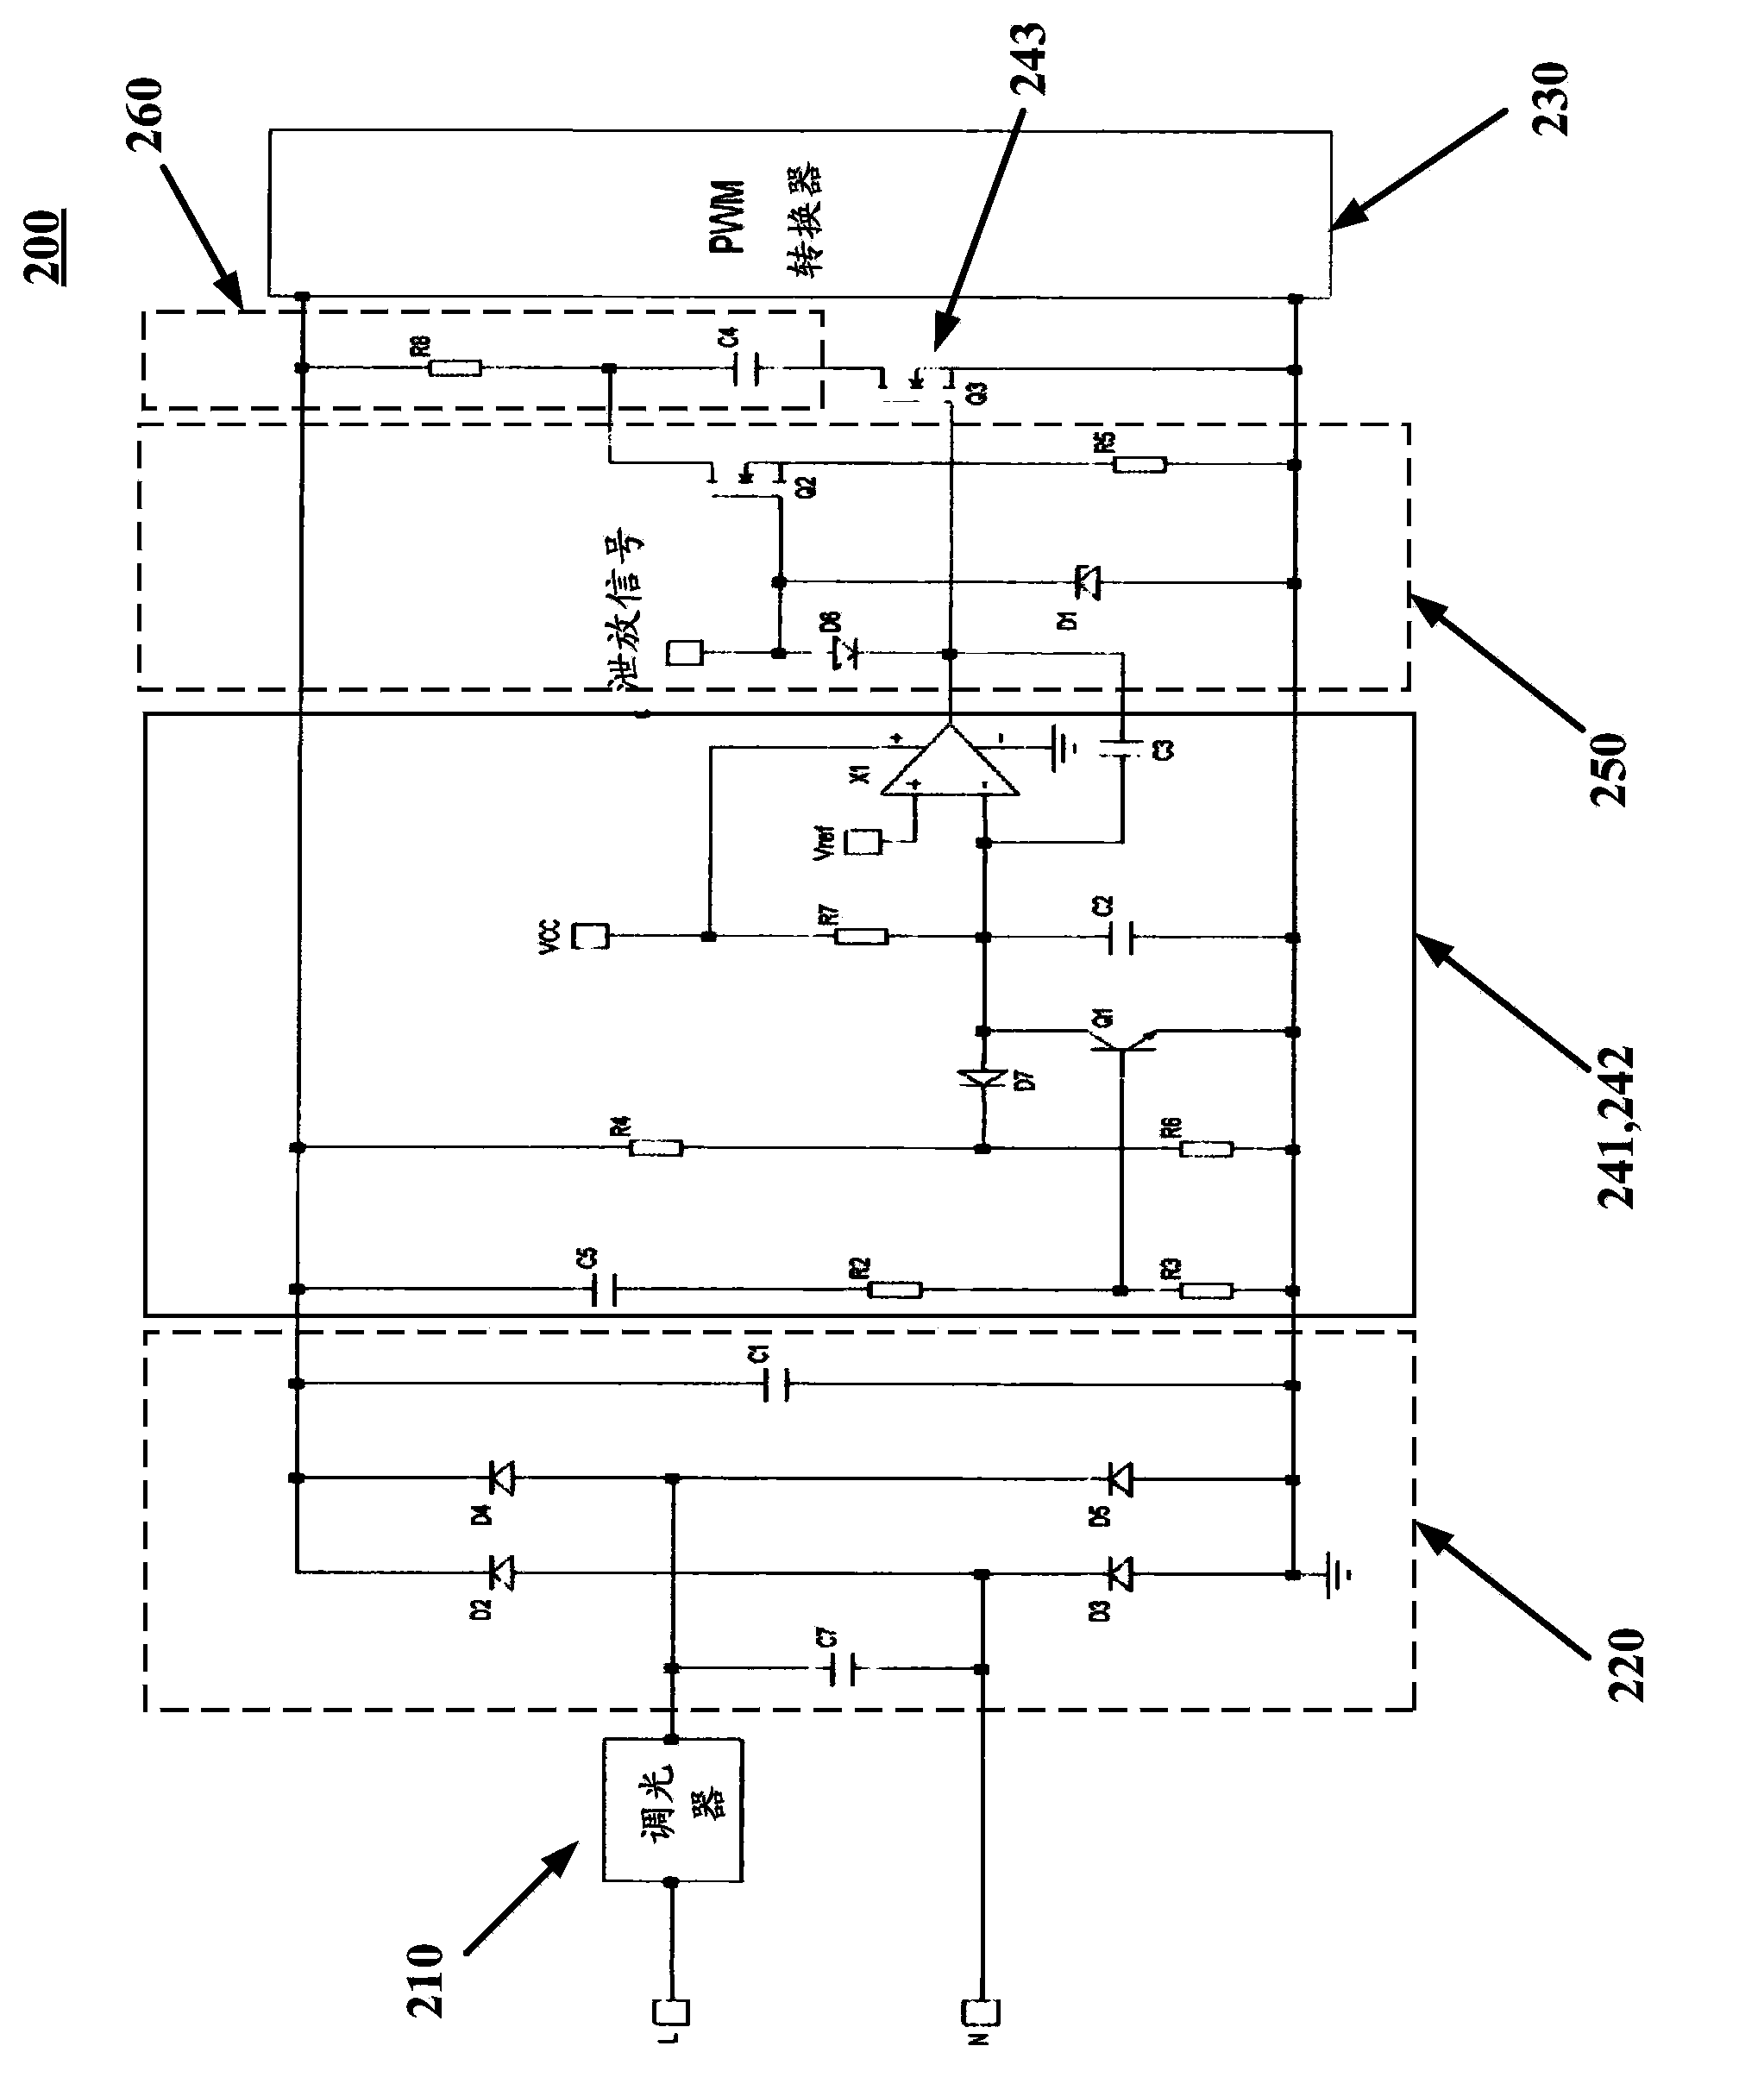 Phase-cut dimming control circuit and lighting control device